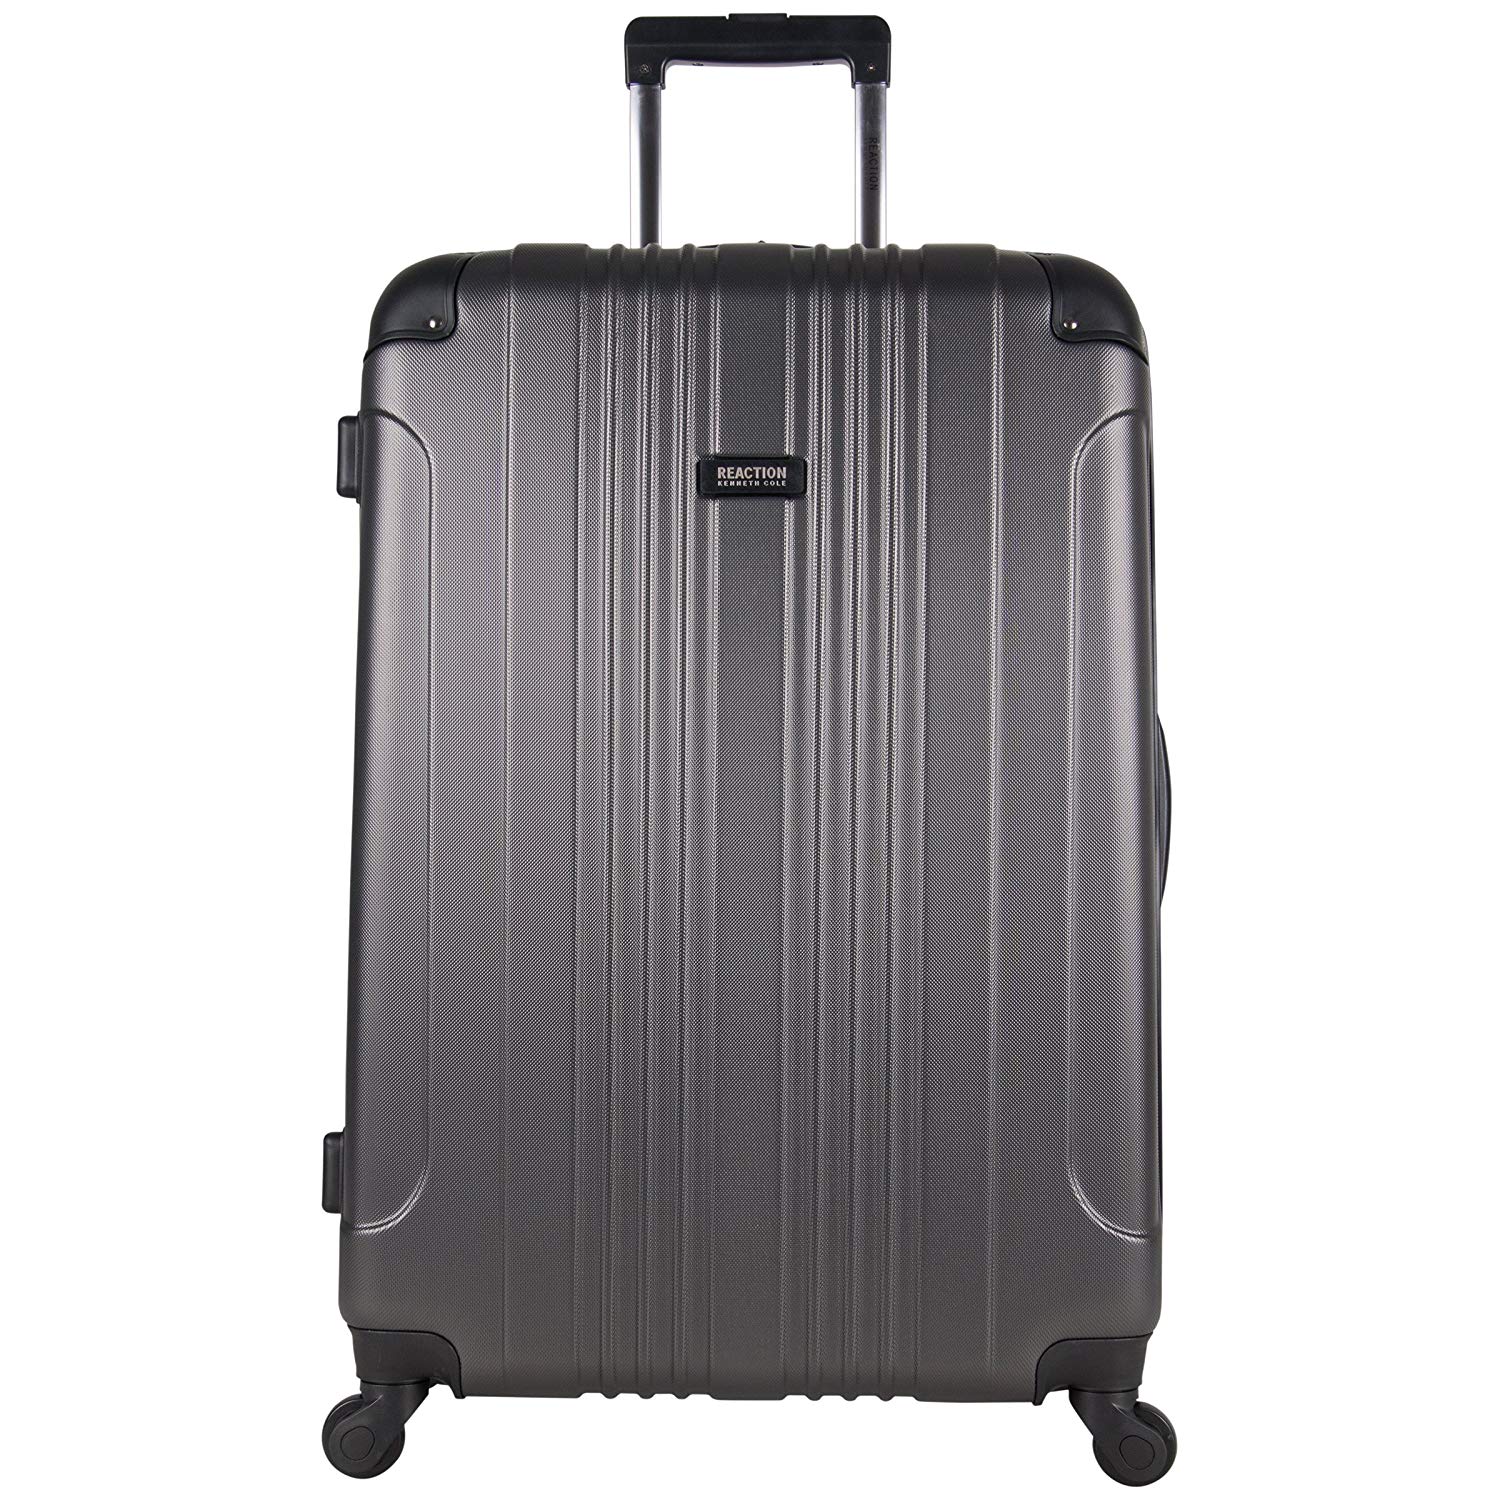 kenneth cole reaction luggage | My Travel Luggage